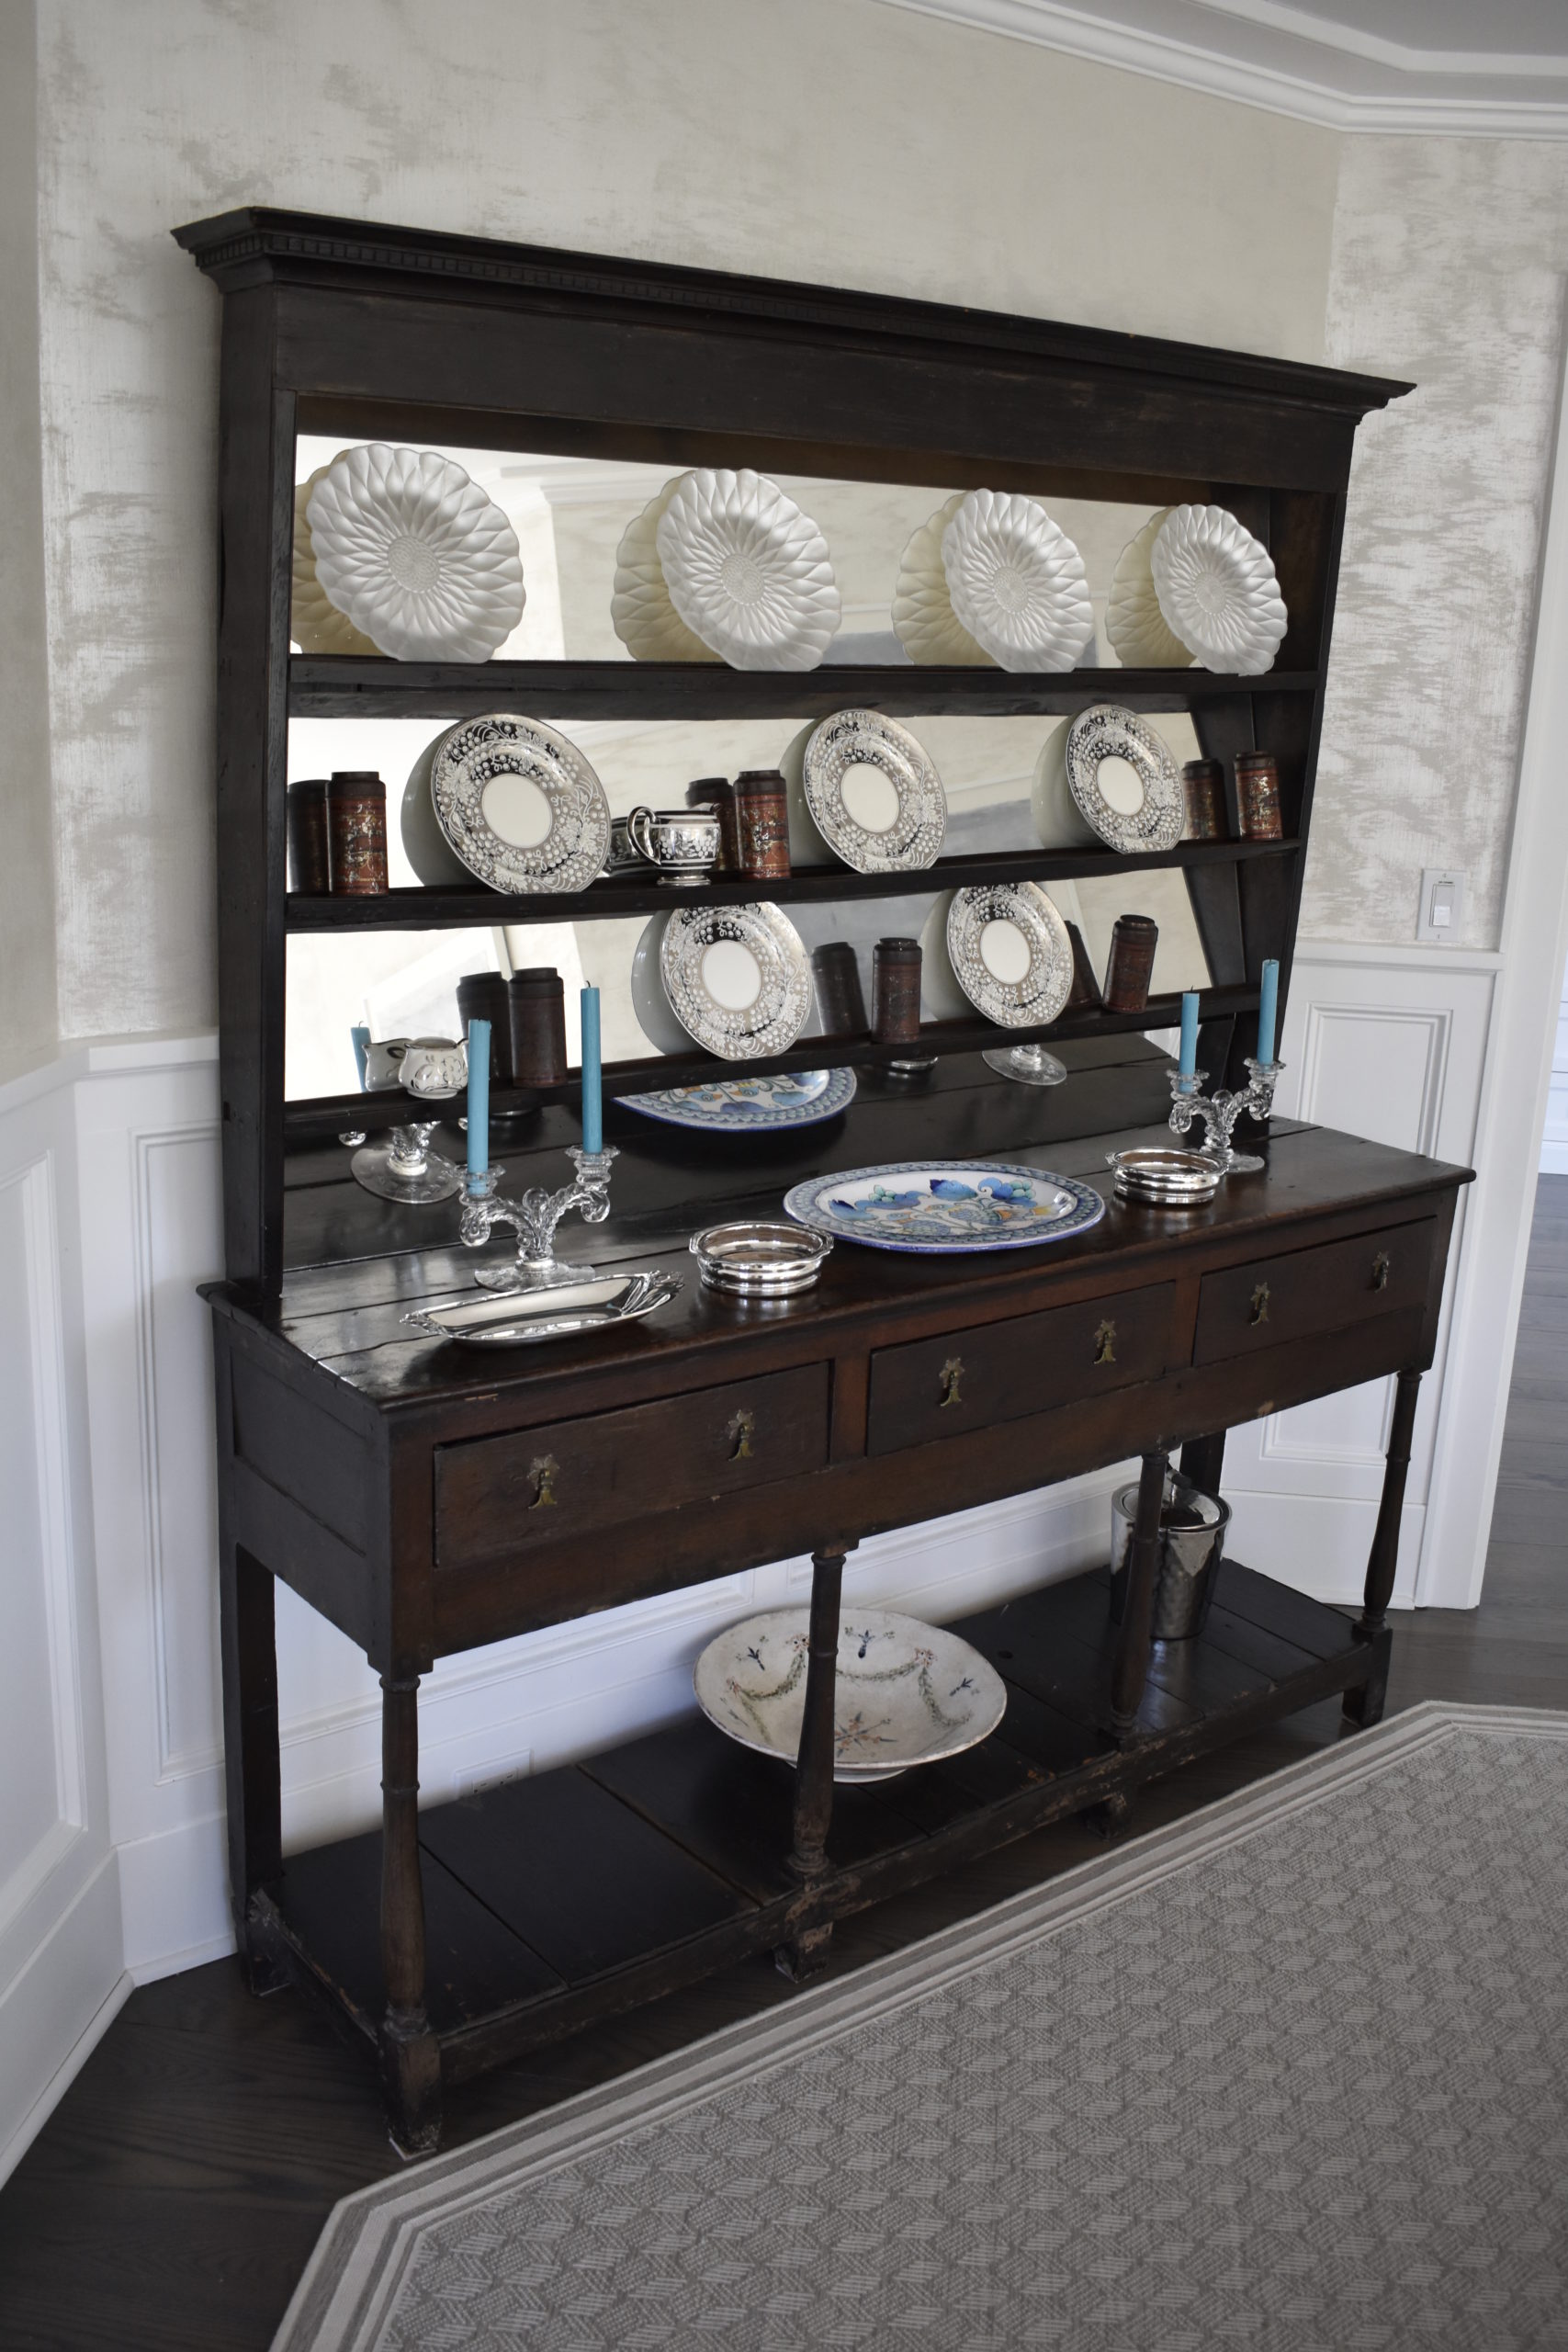 Evan Mason added mirrors to a piece of heirloom furniture to brighten it up. BRENDAN J. O'REILLY